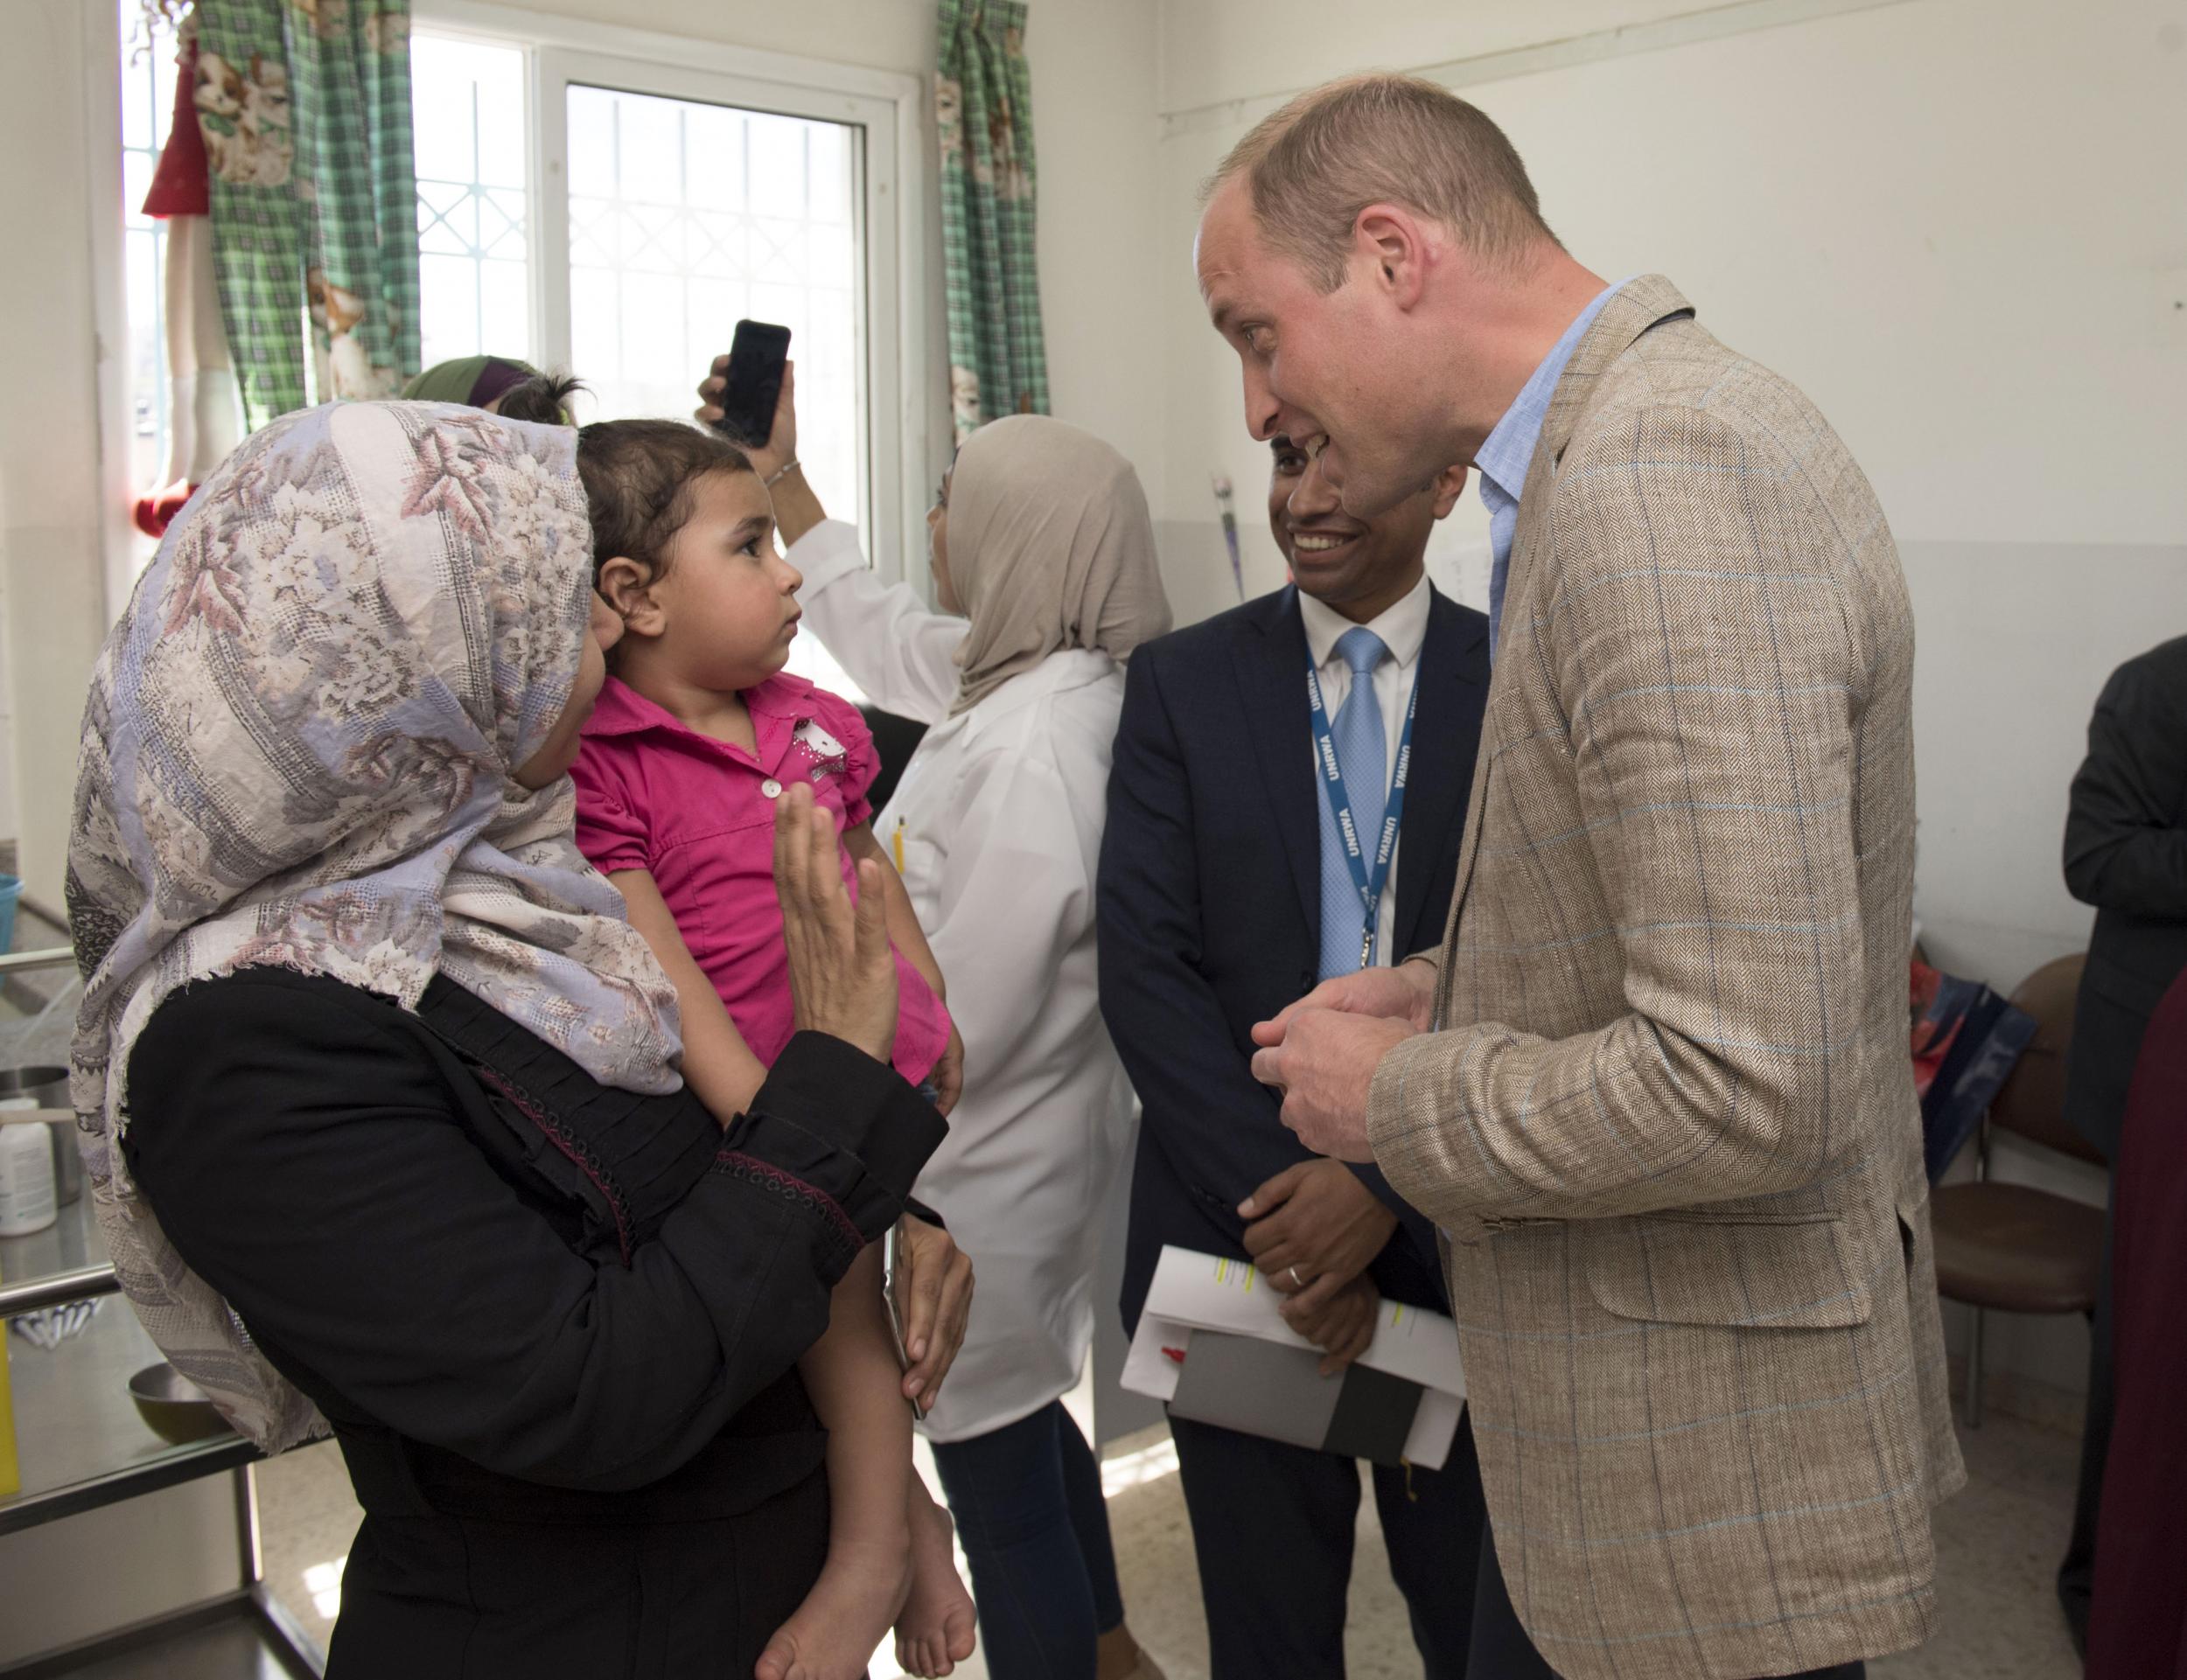 Prince William meets members of the community at Jalazone refugee camp, north of Ramallah, on 27 June 2018